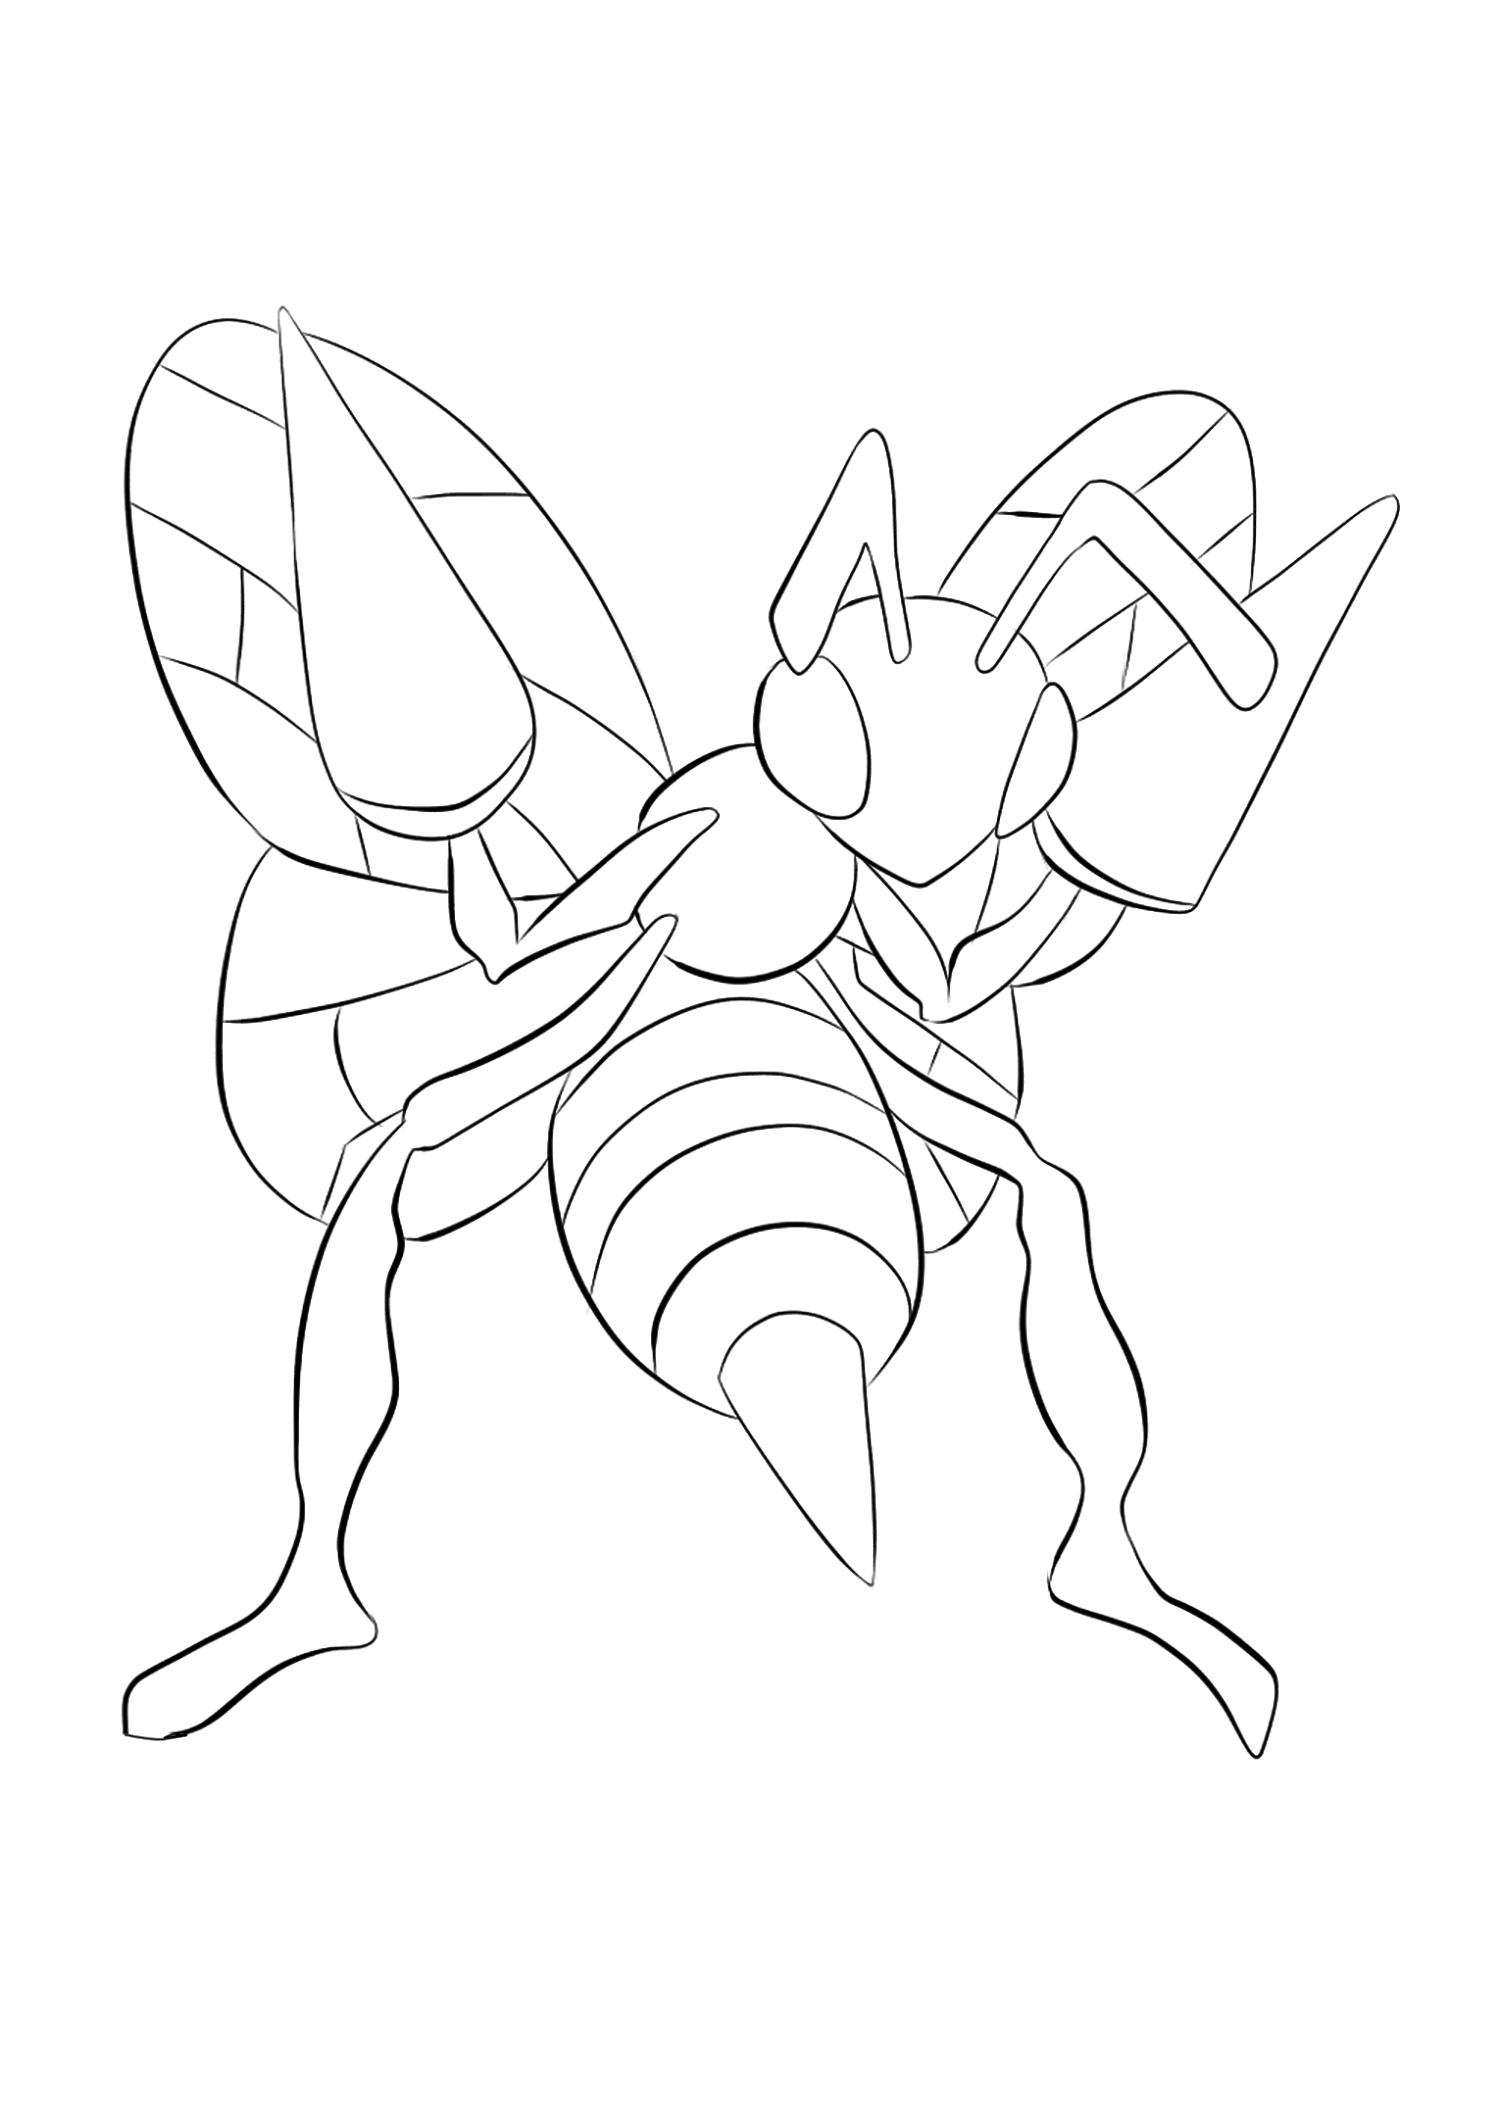 Dardargnan (No.15). Coloriage de Dardargnan (Beedrill), Pokémon de Génération I, de type : Insecte et PoisonOriginal image credit: Pokemon linearts by Lilly Gerbil'font-size:smaller;color:gray'>Permission: All rights reserved © Pokemon company and Ken Sugimori.